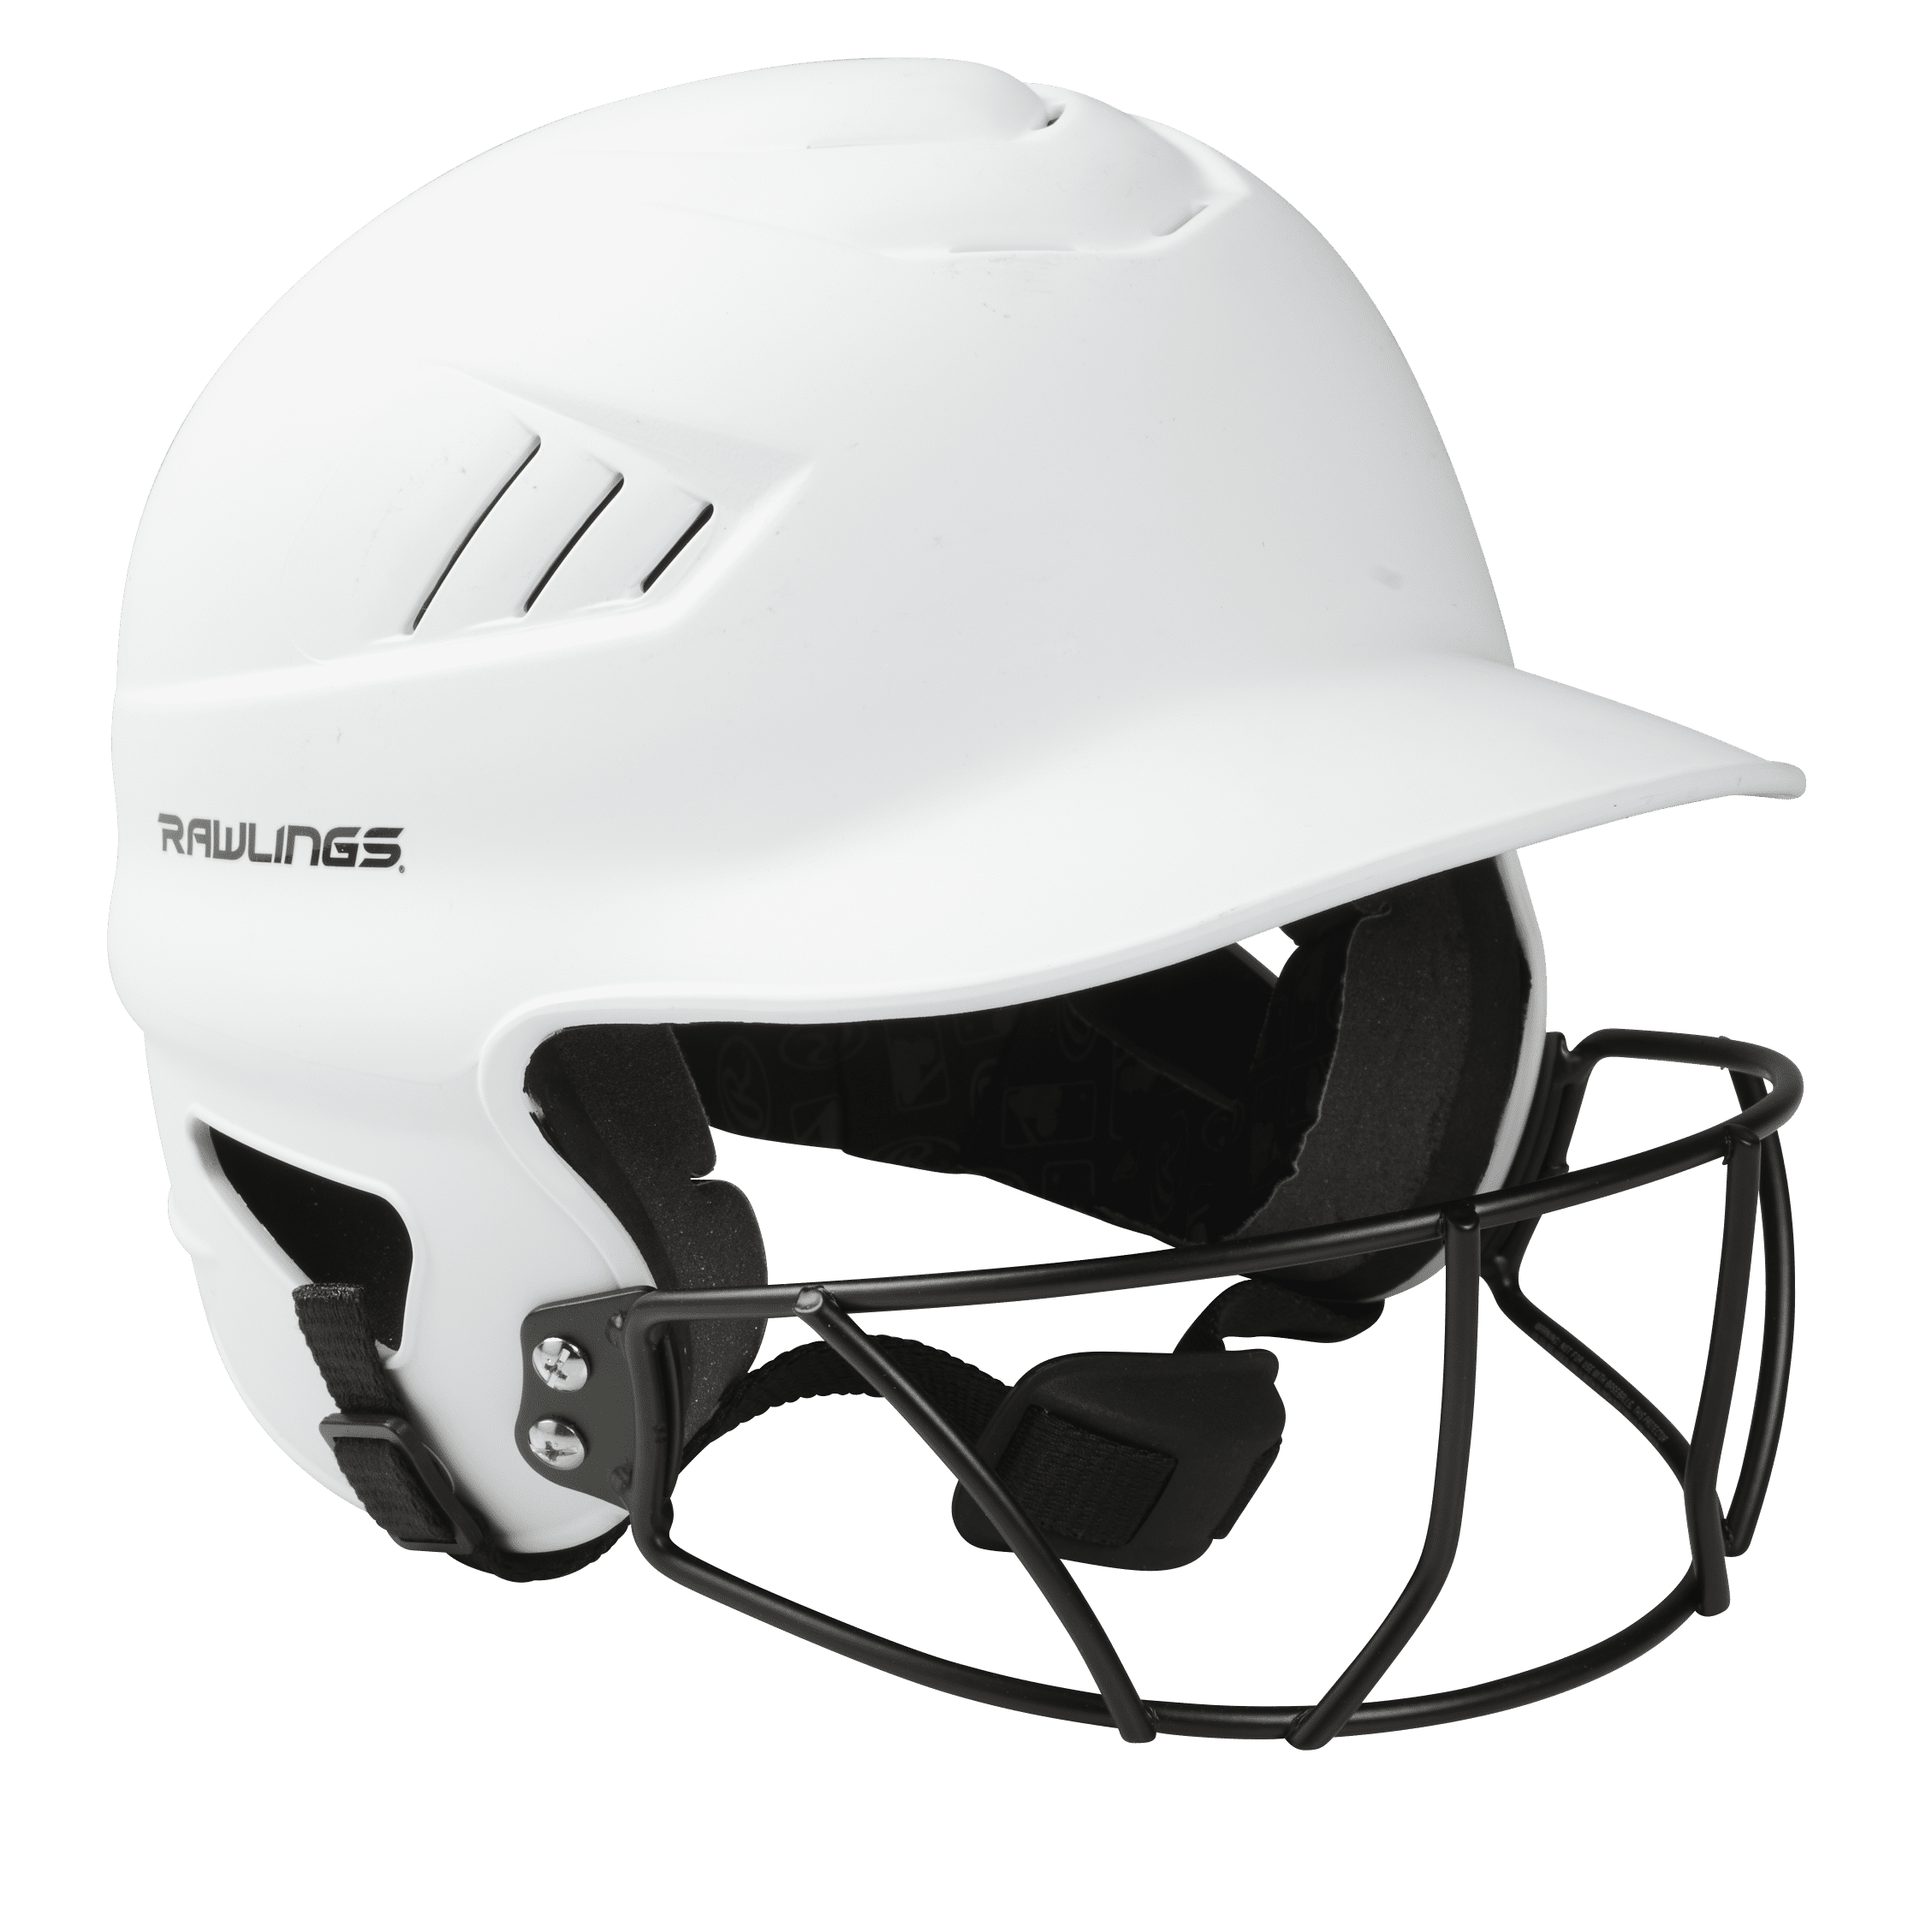 RAWLINGS FACE MASK P03R RJOPDW NEW 